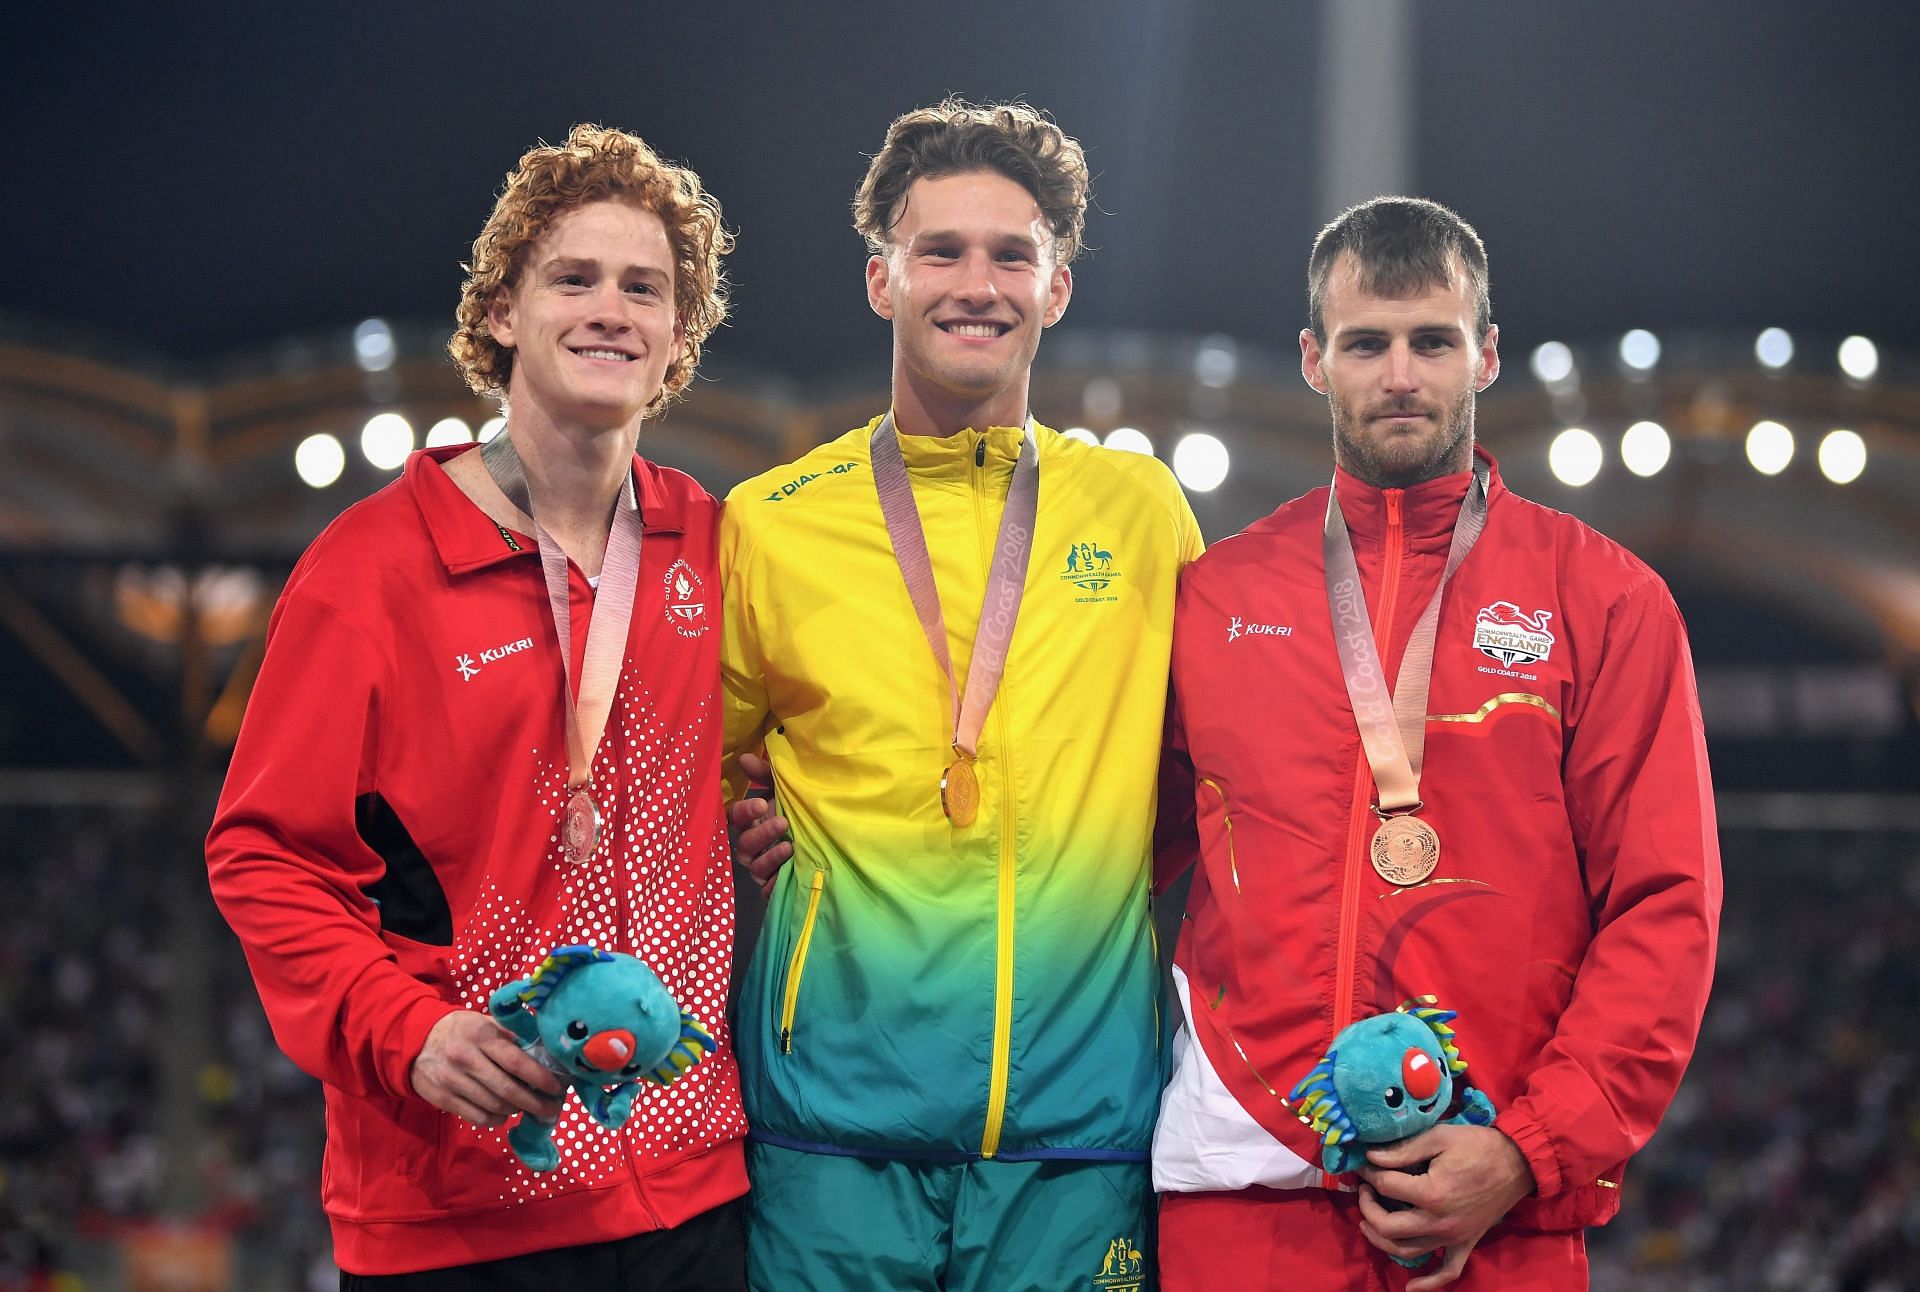 Shawn Barber with athletes Kurtis Marschall and Luke Cutts at Commonwealth Games Day 8